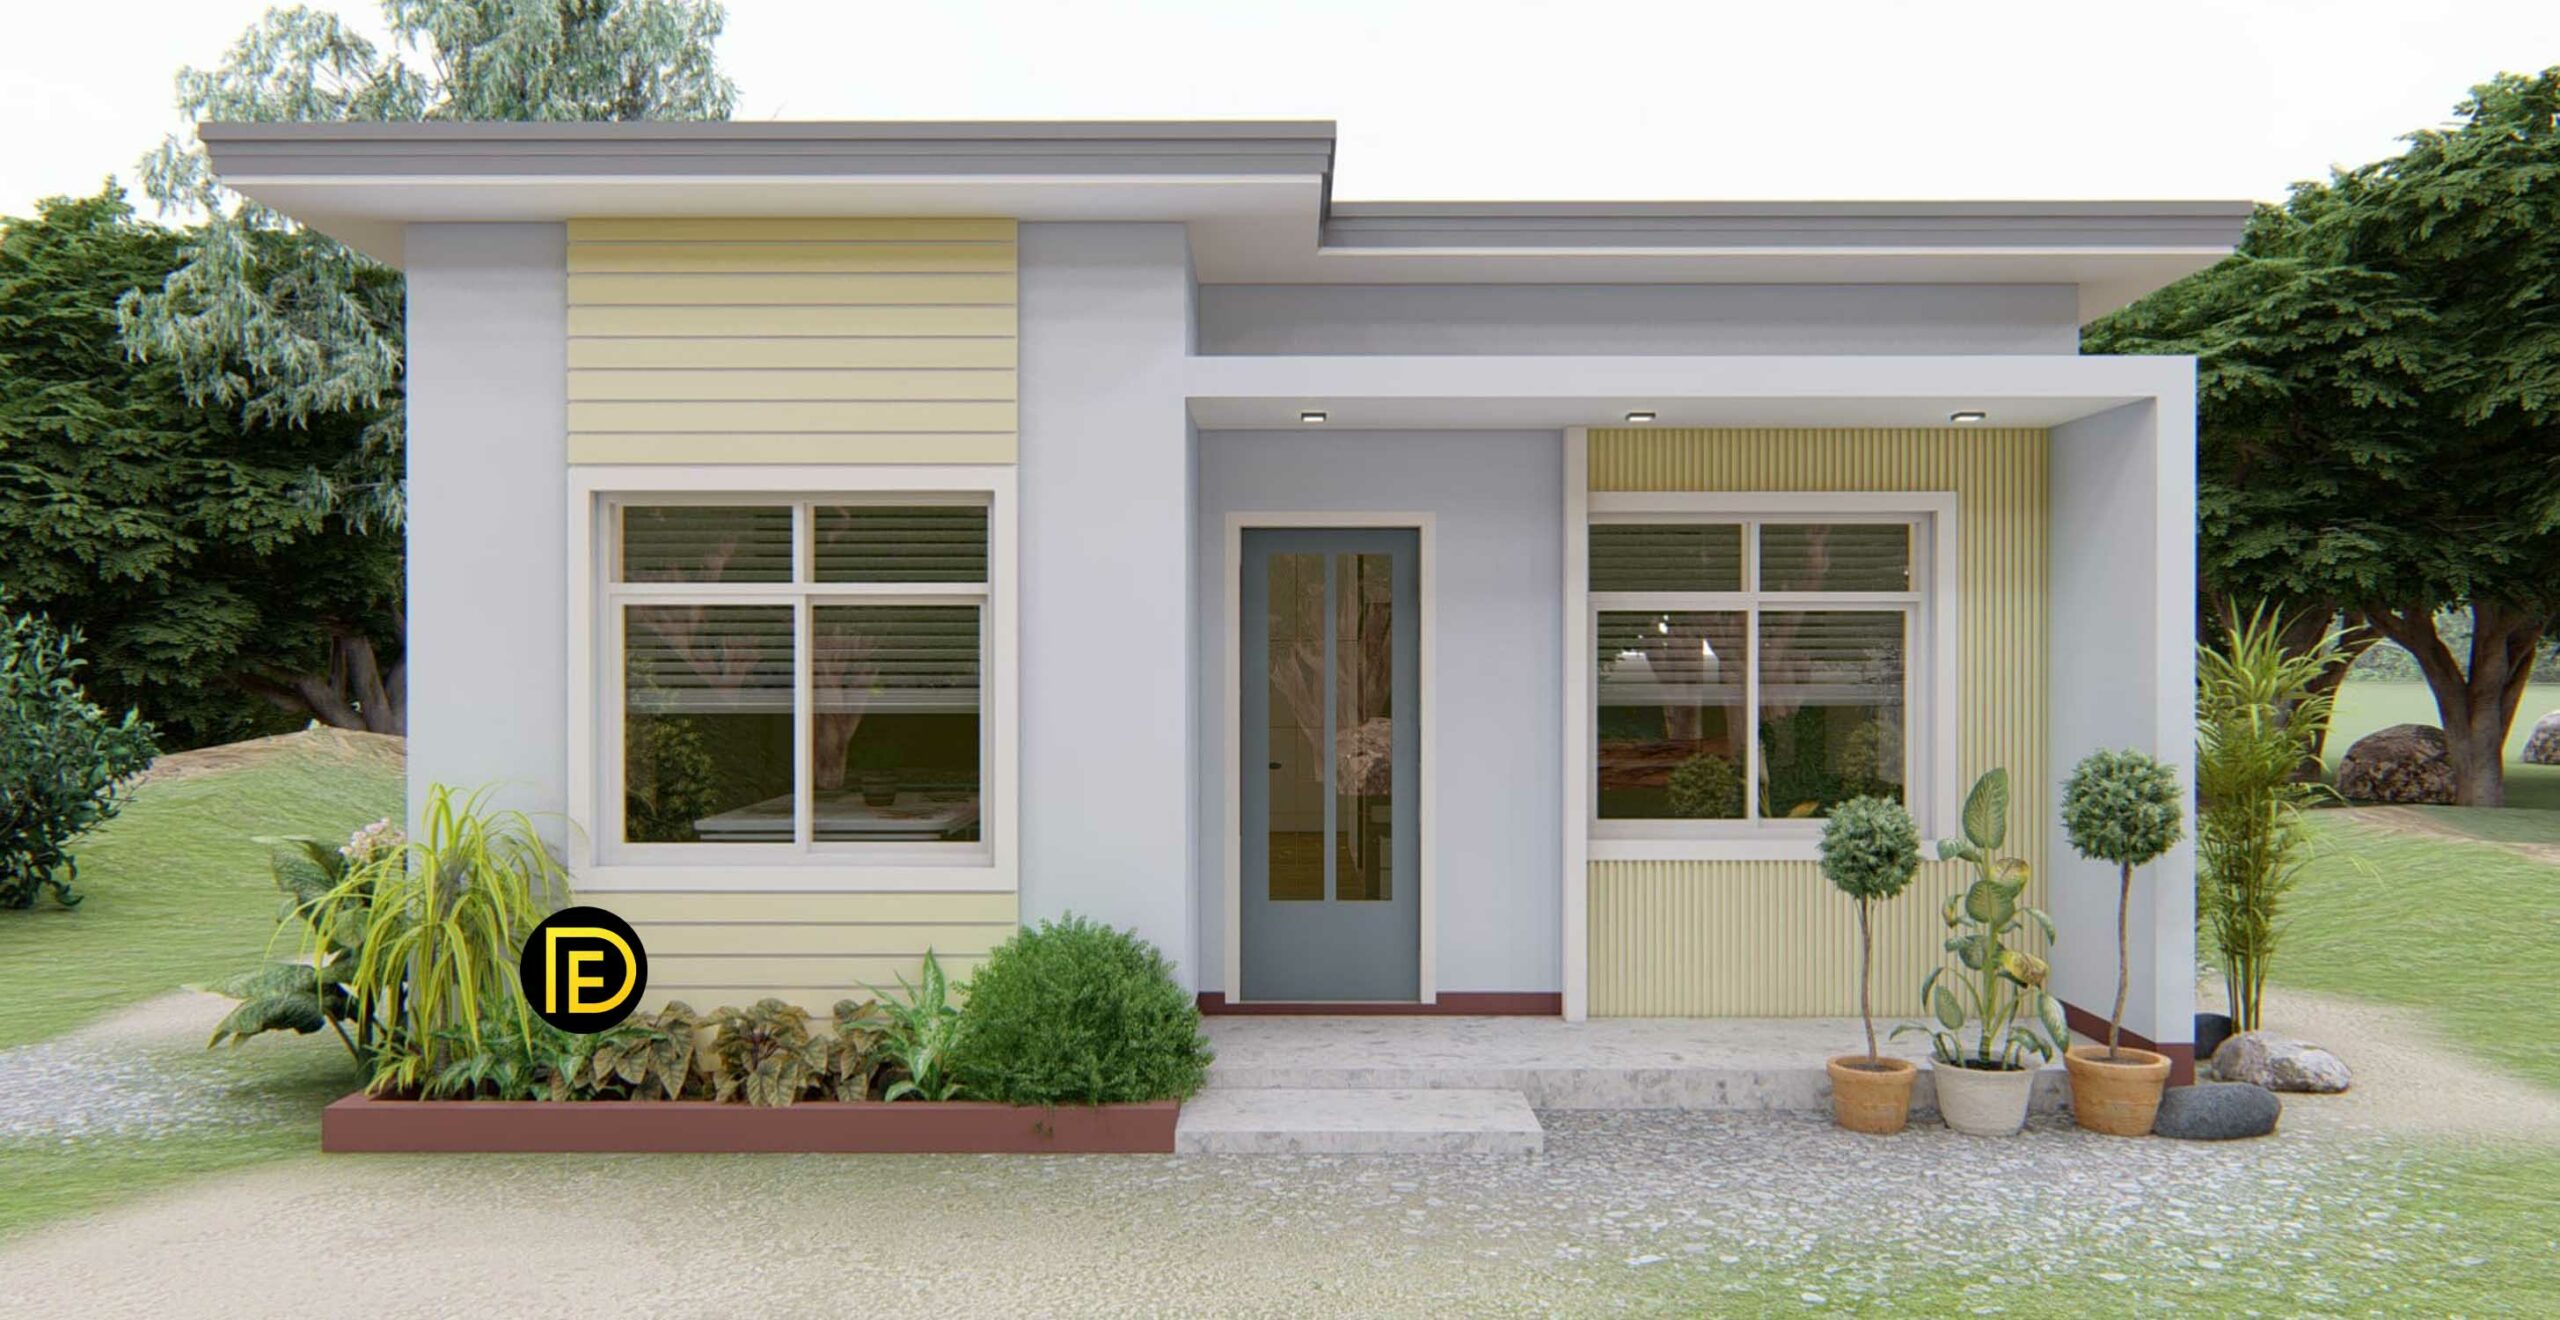 55.25 SQ.M. Modern Bungalow House Design Plans 8.50m X 6.50m With 2 Bedroom Scaled 